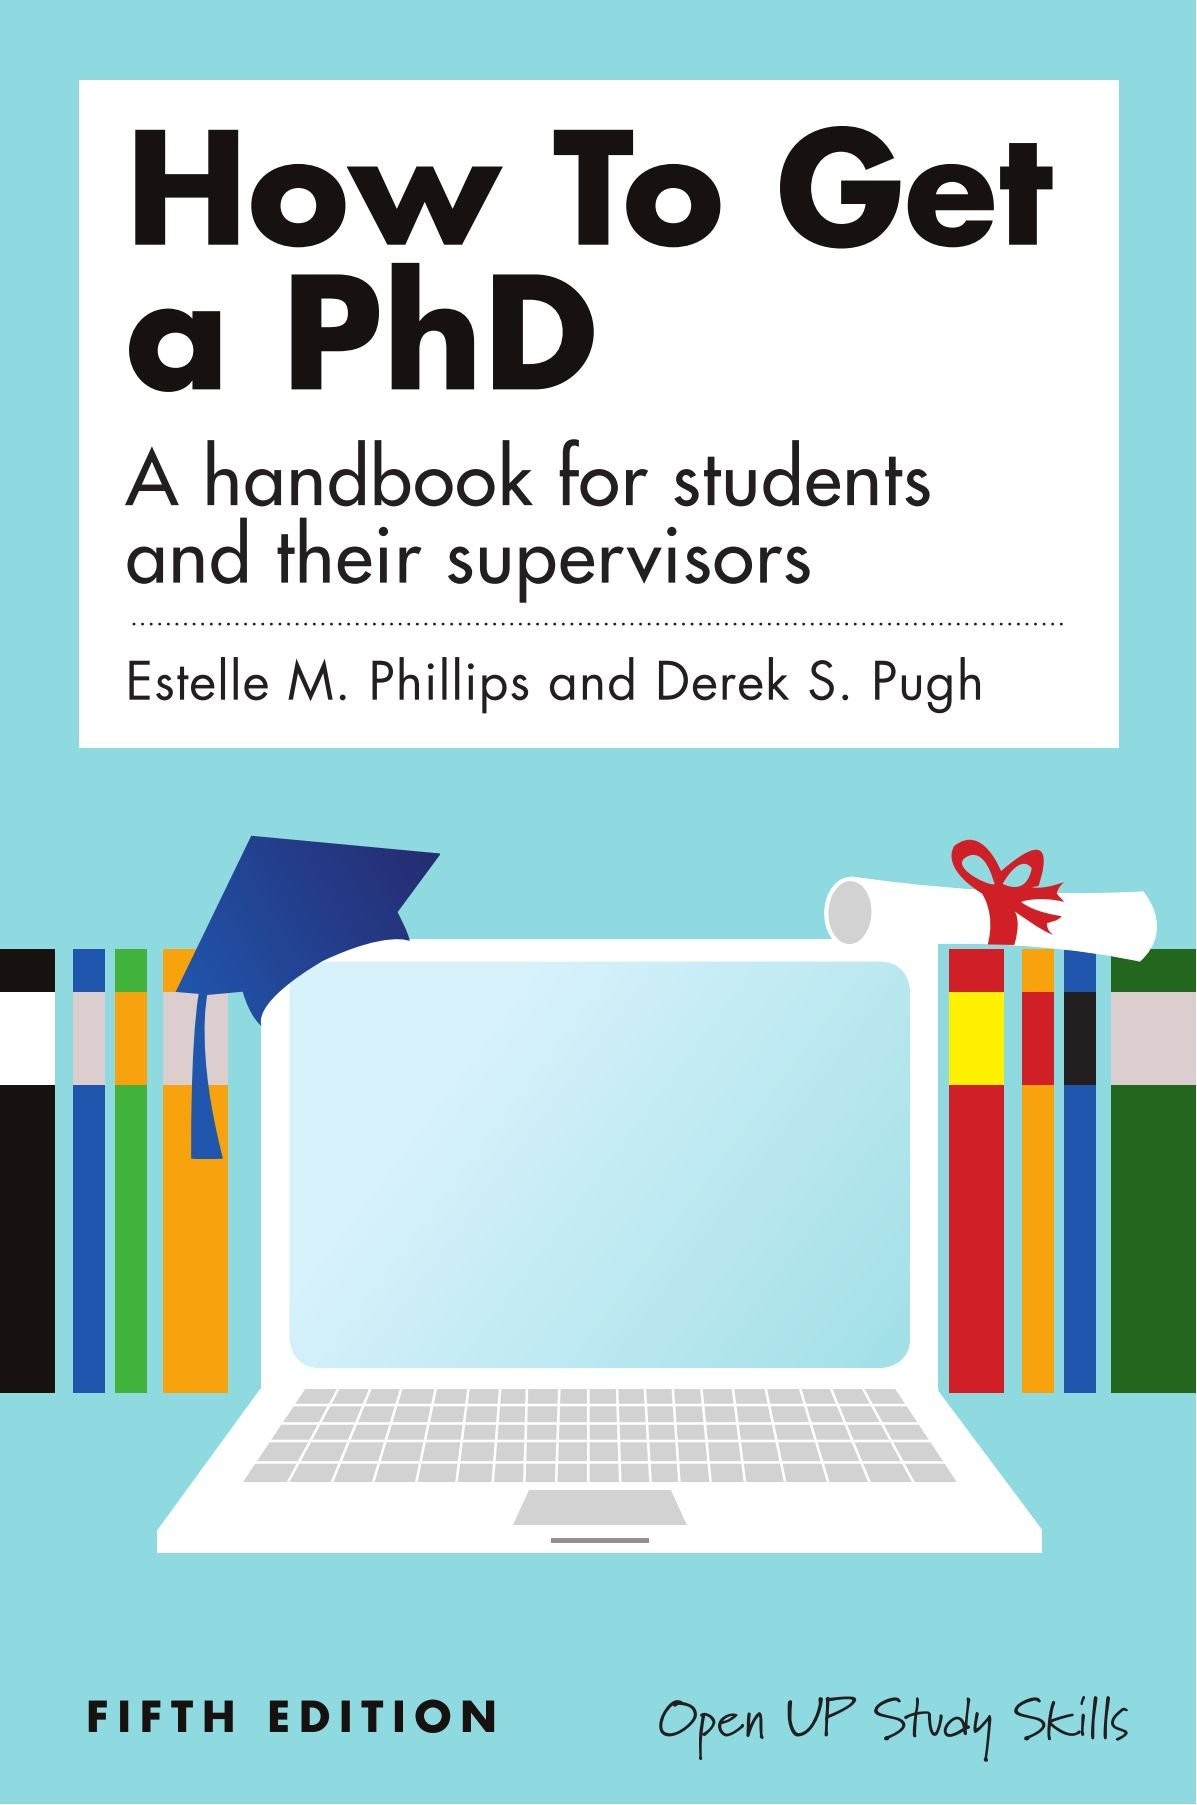 How to Get a Phd: A Handbook for Students and Their Supervisors - Fifth Edition